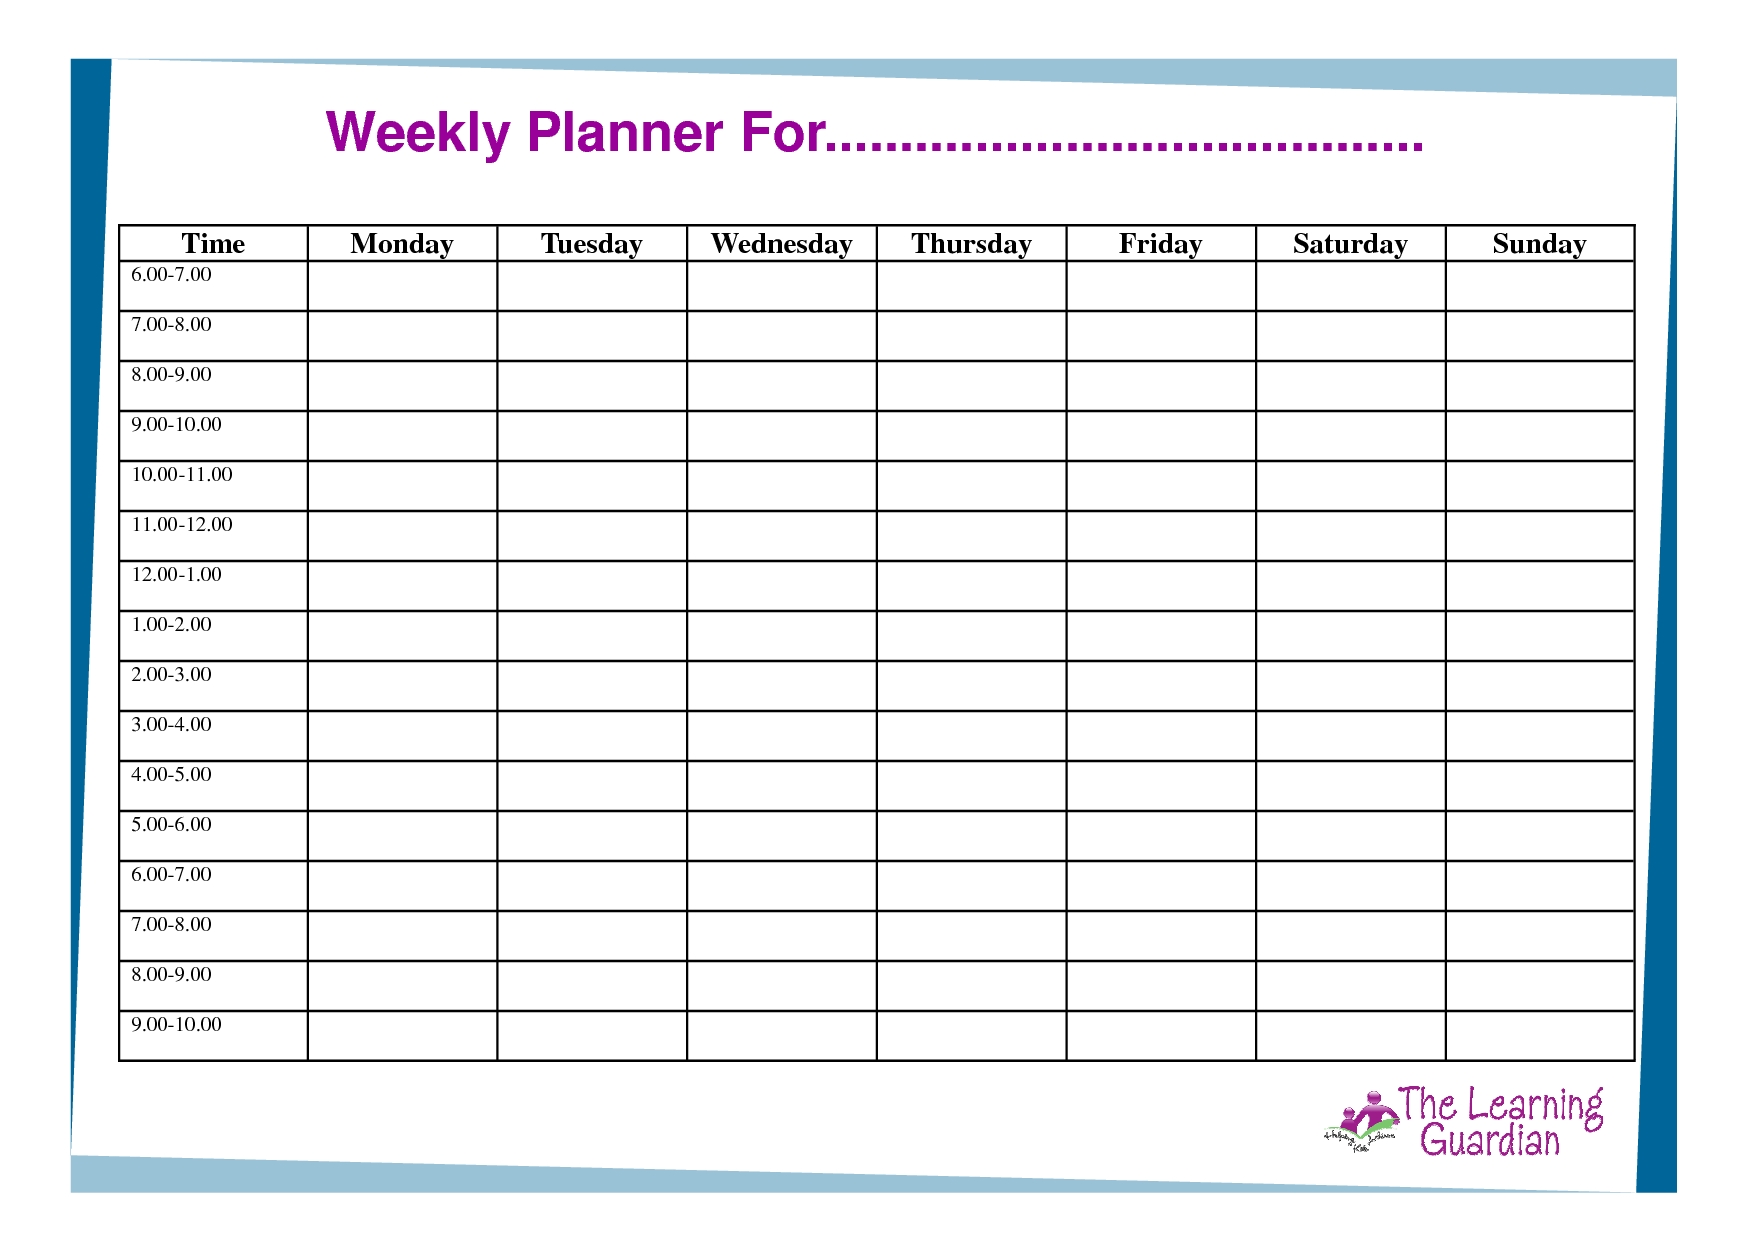 Free Printable Weekly Calendar Templates | Weekly Planner-Calendar Template Monday Friday